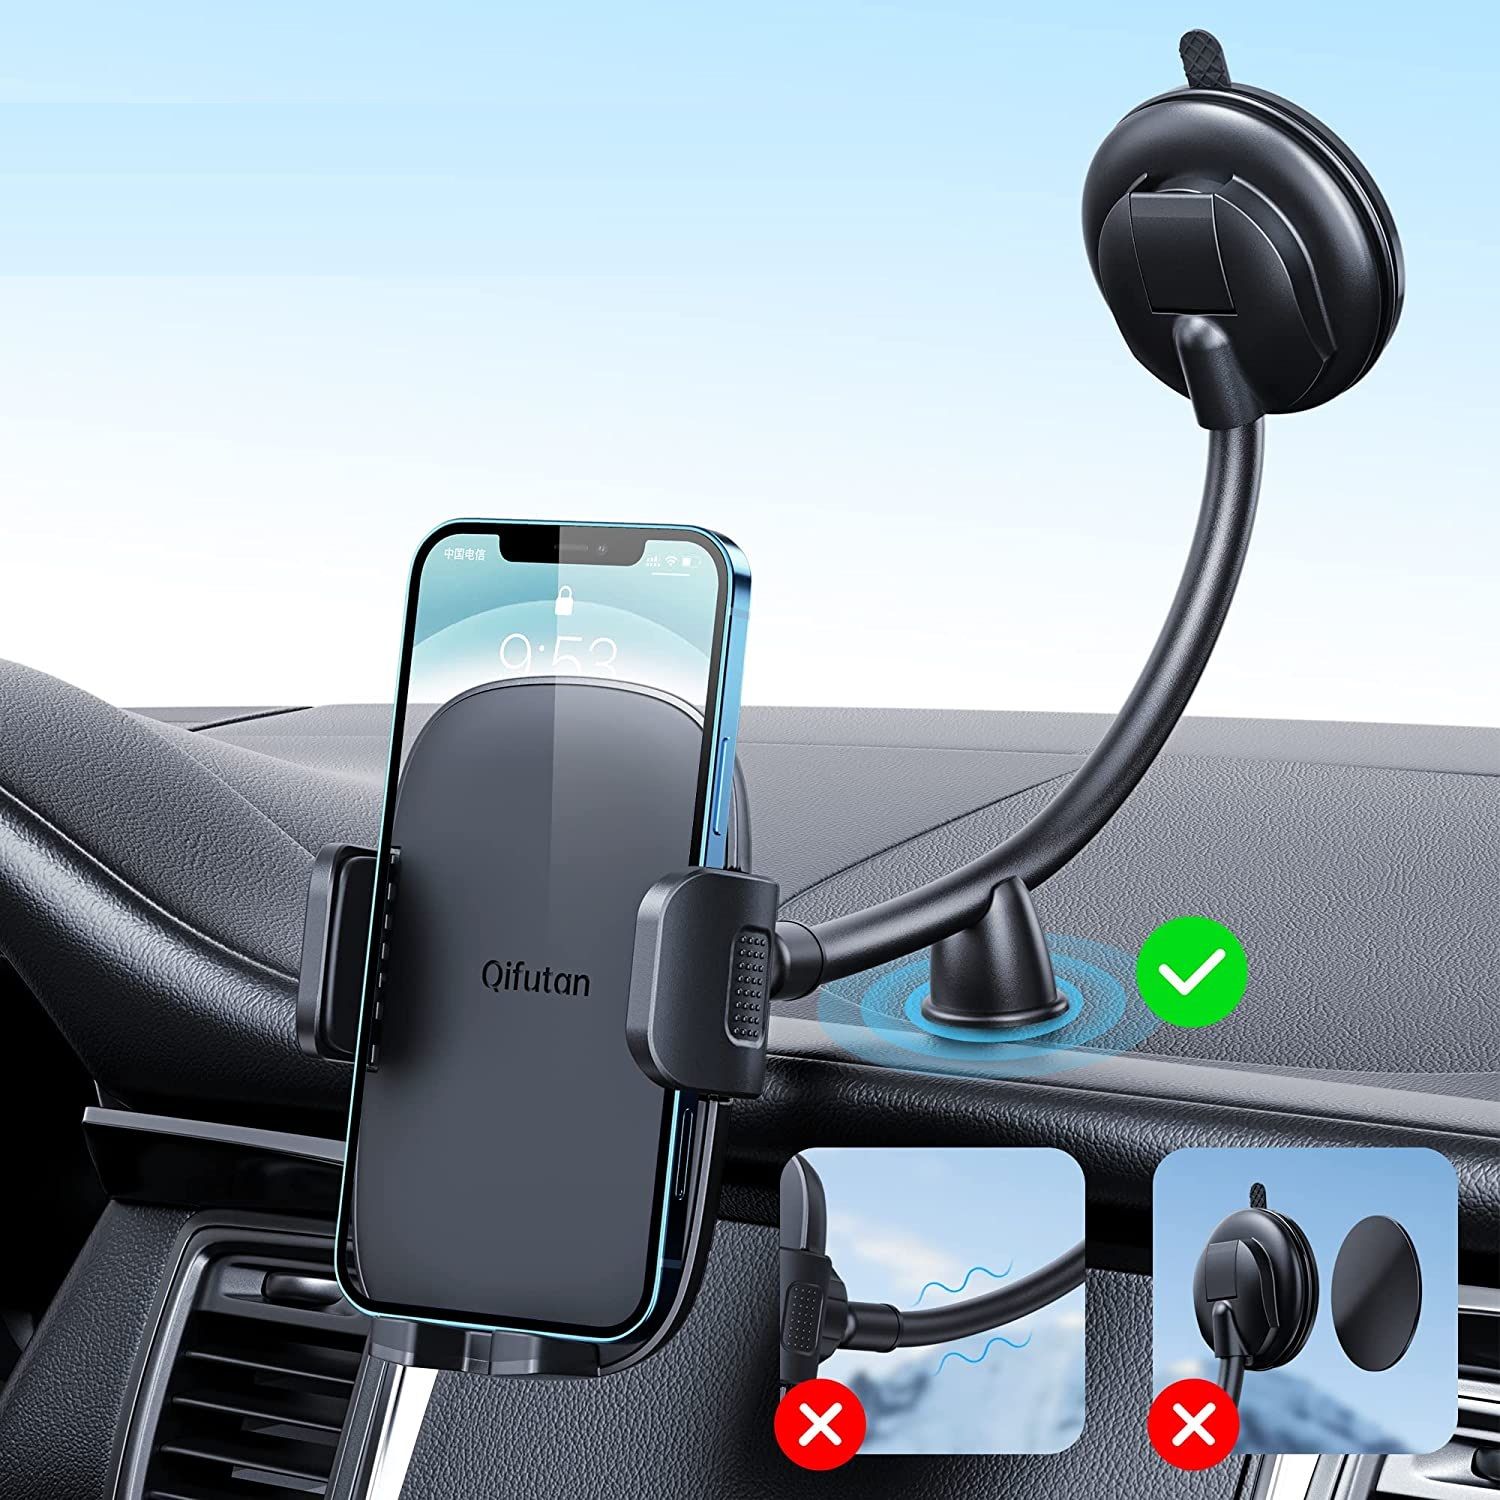 Qifuton Cell Phone Holder for Car 2